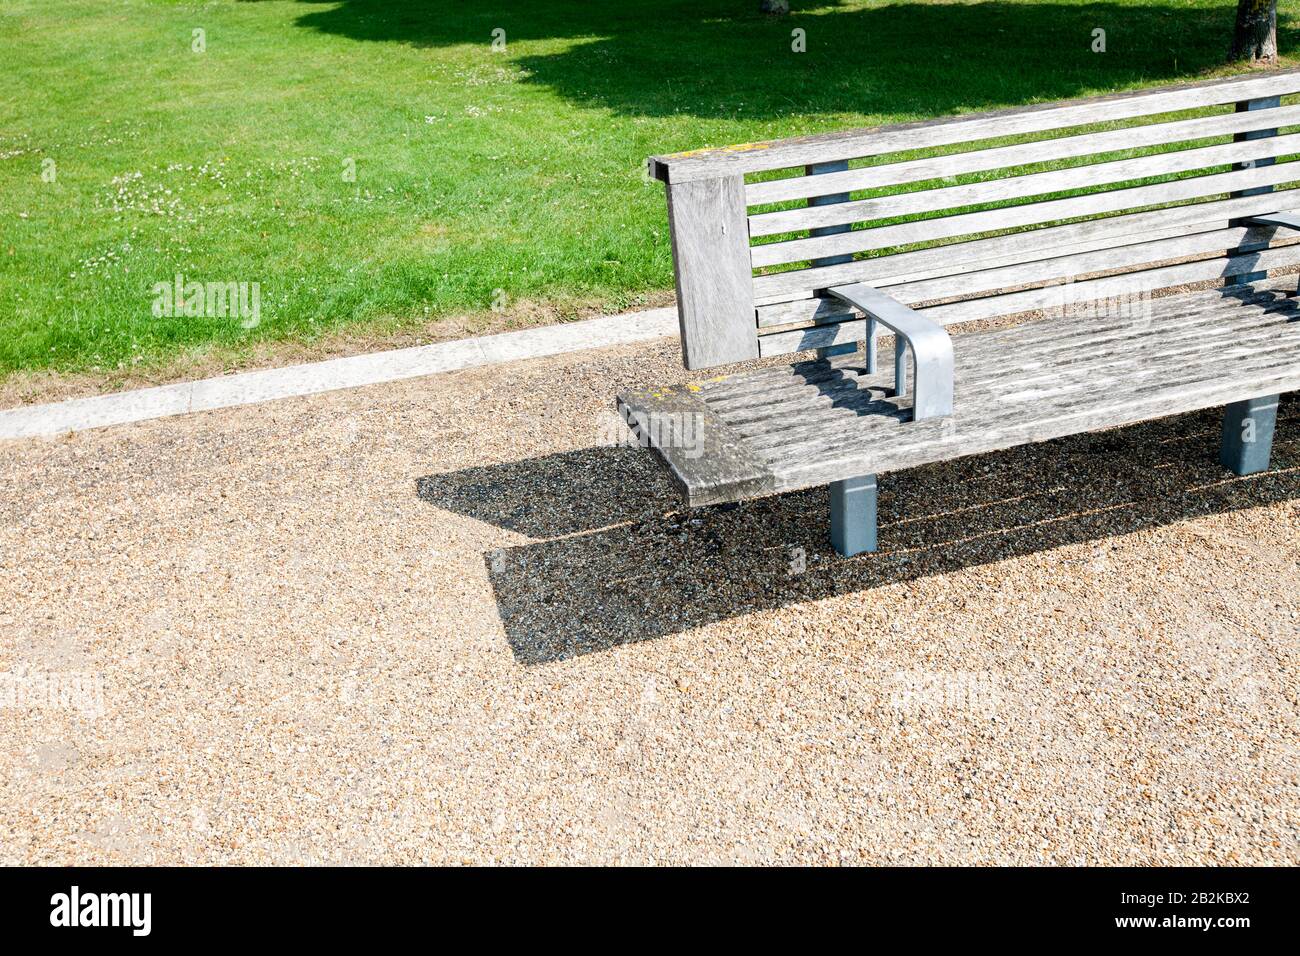 Close-up view of Wooden bench in London Park Stock Photo